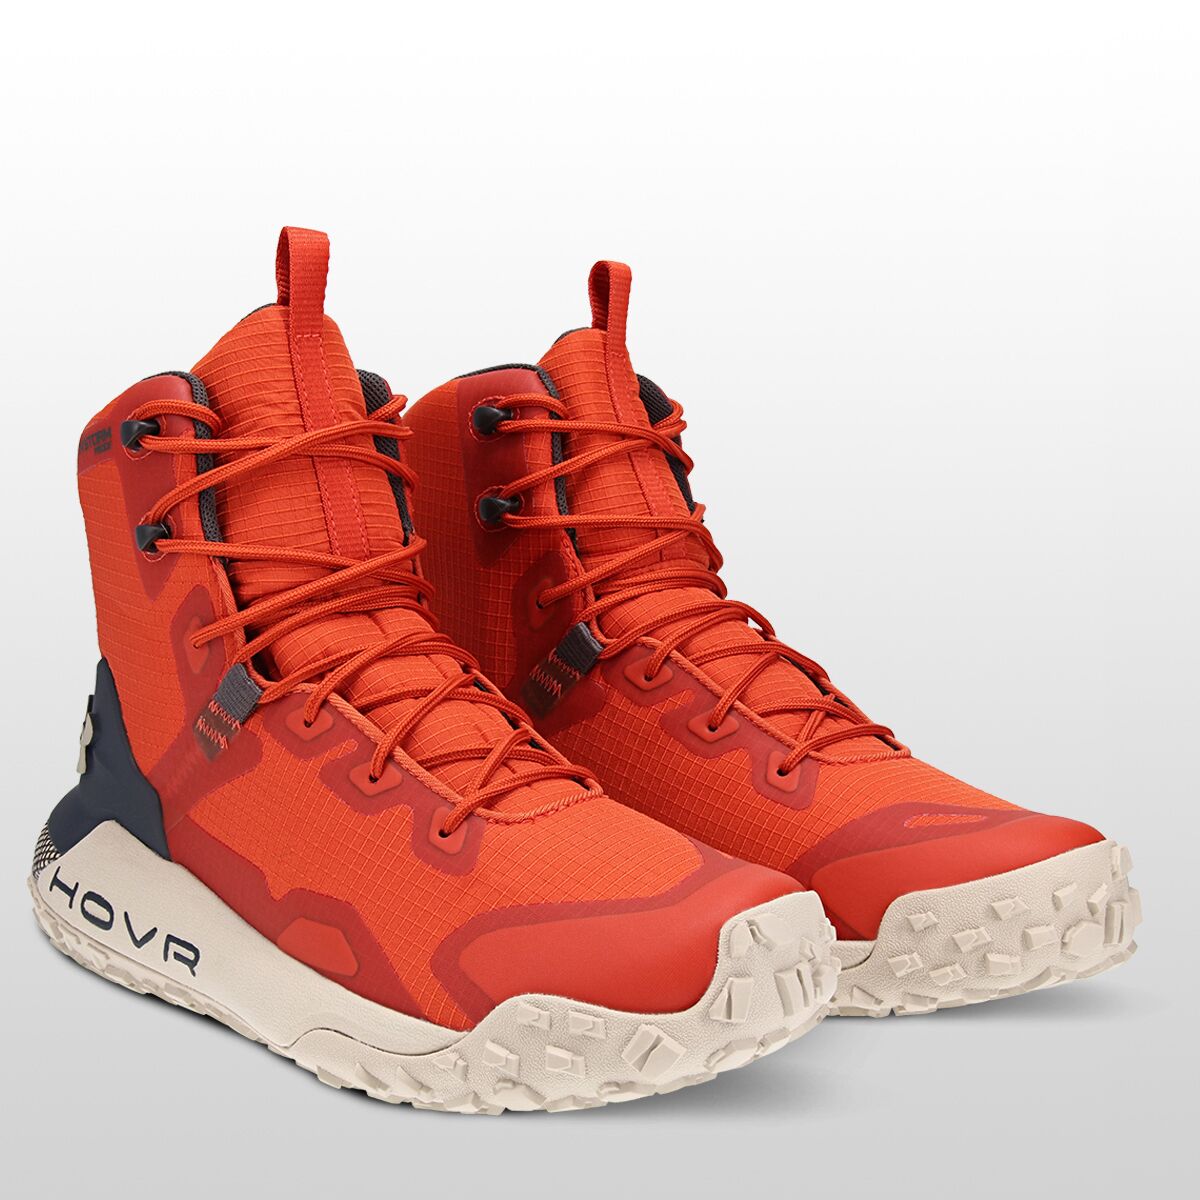 Under Armour HOVR Dawn WP Hiking Boot - Men's - Footwear